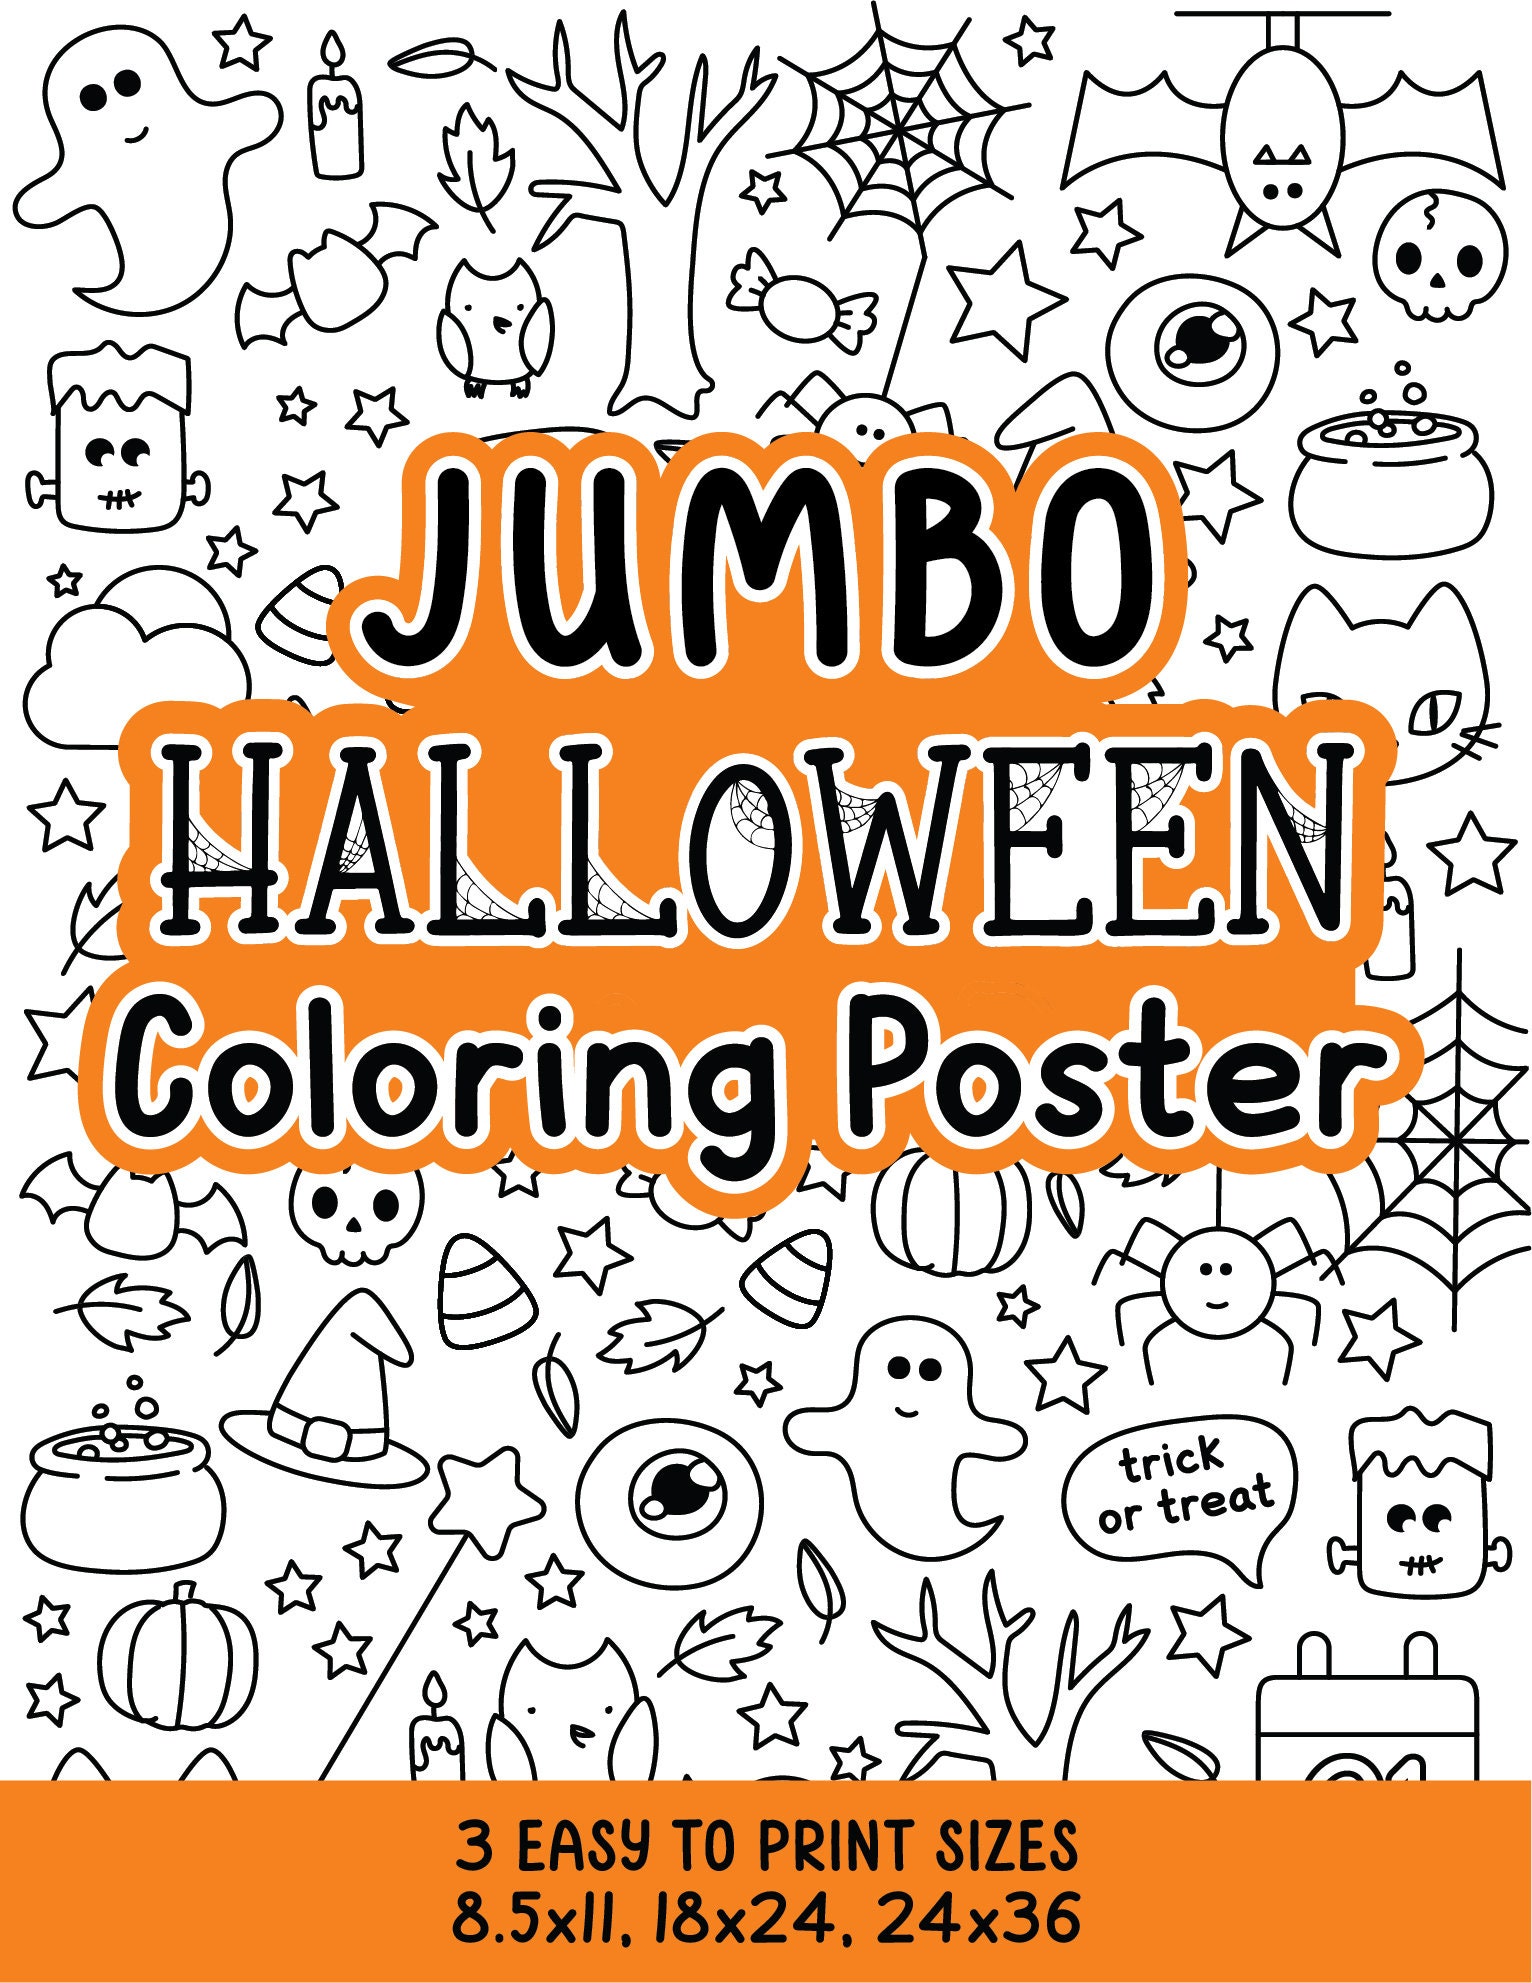 Jumbo halloween coloring poster halloween coloring sheet for party doodle coloring page kids coloring sheet homeschool printable